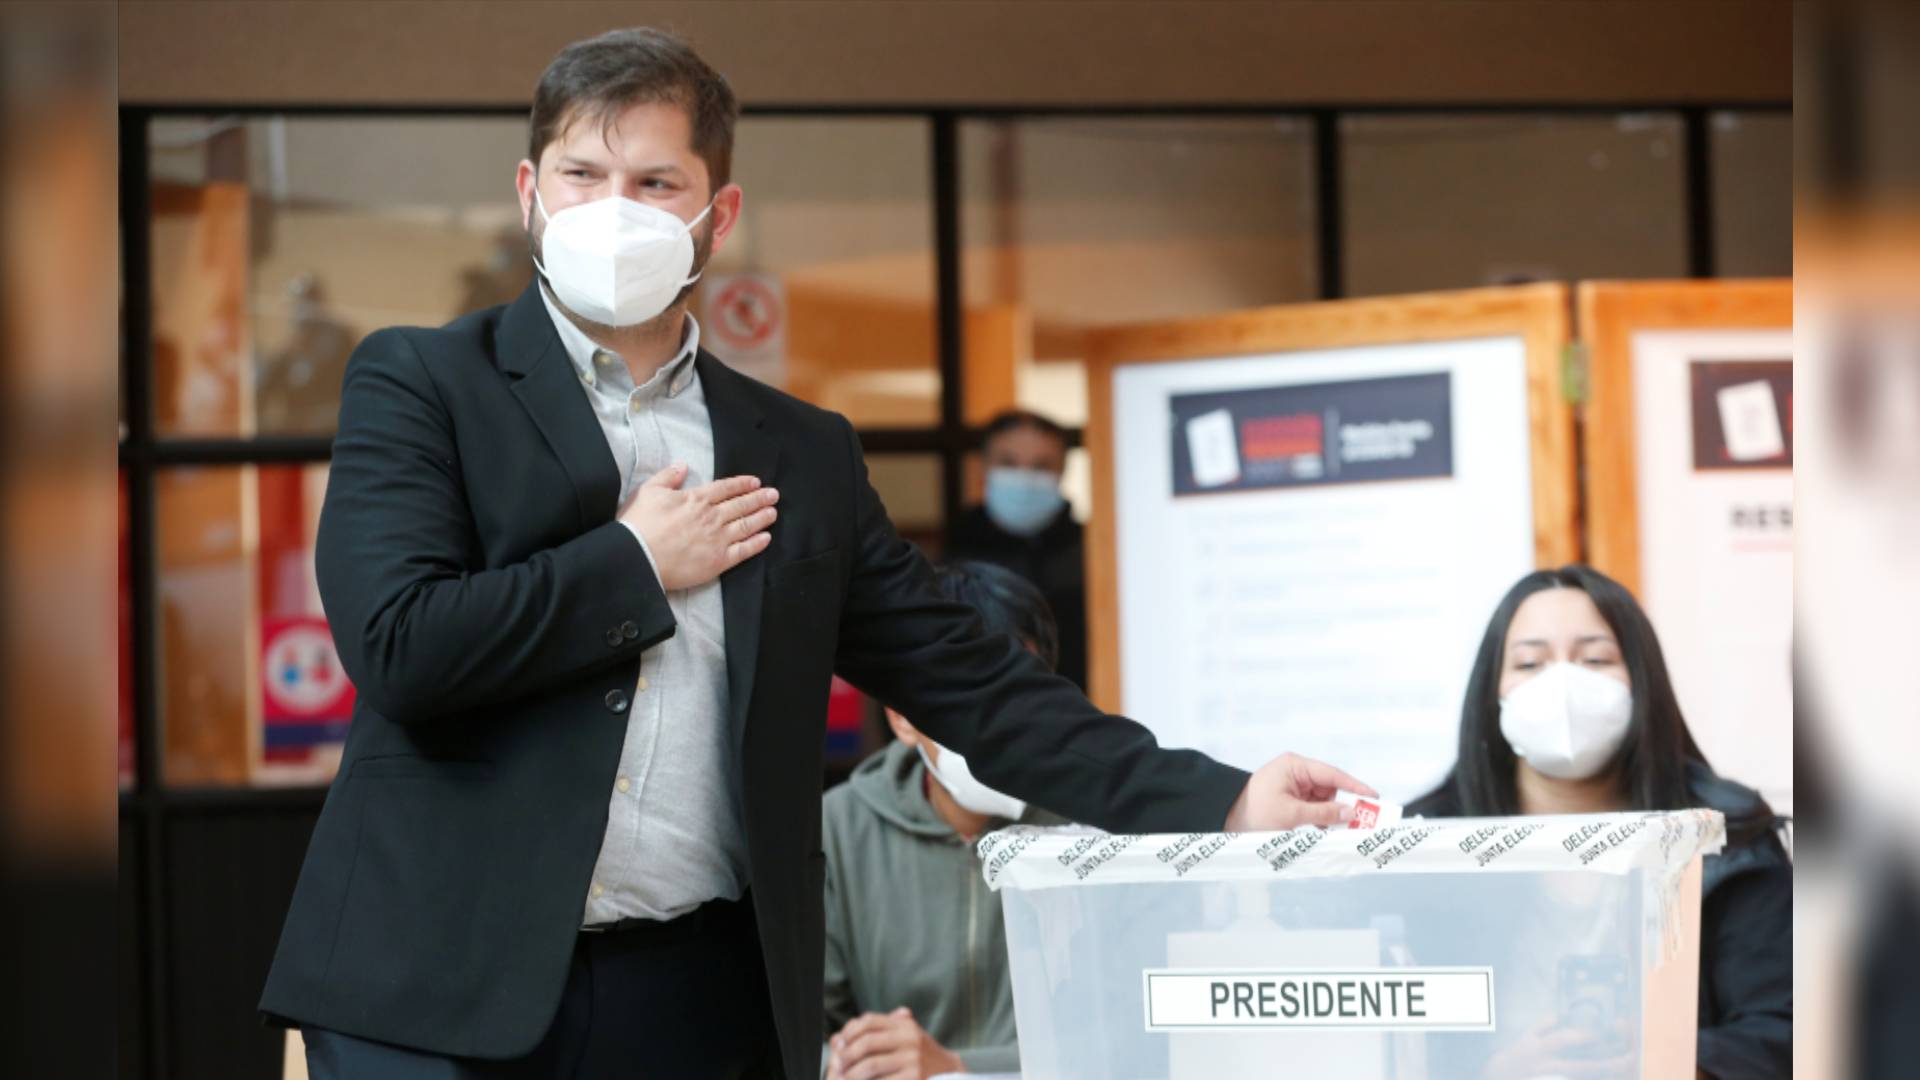 GLOBALink | Leftist candidate Gabriel Boric wins Chilean presidential election